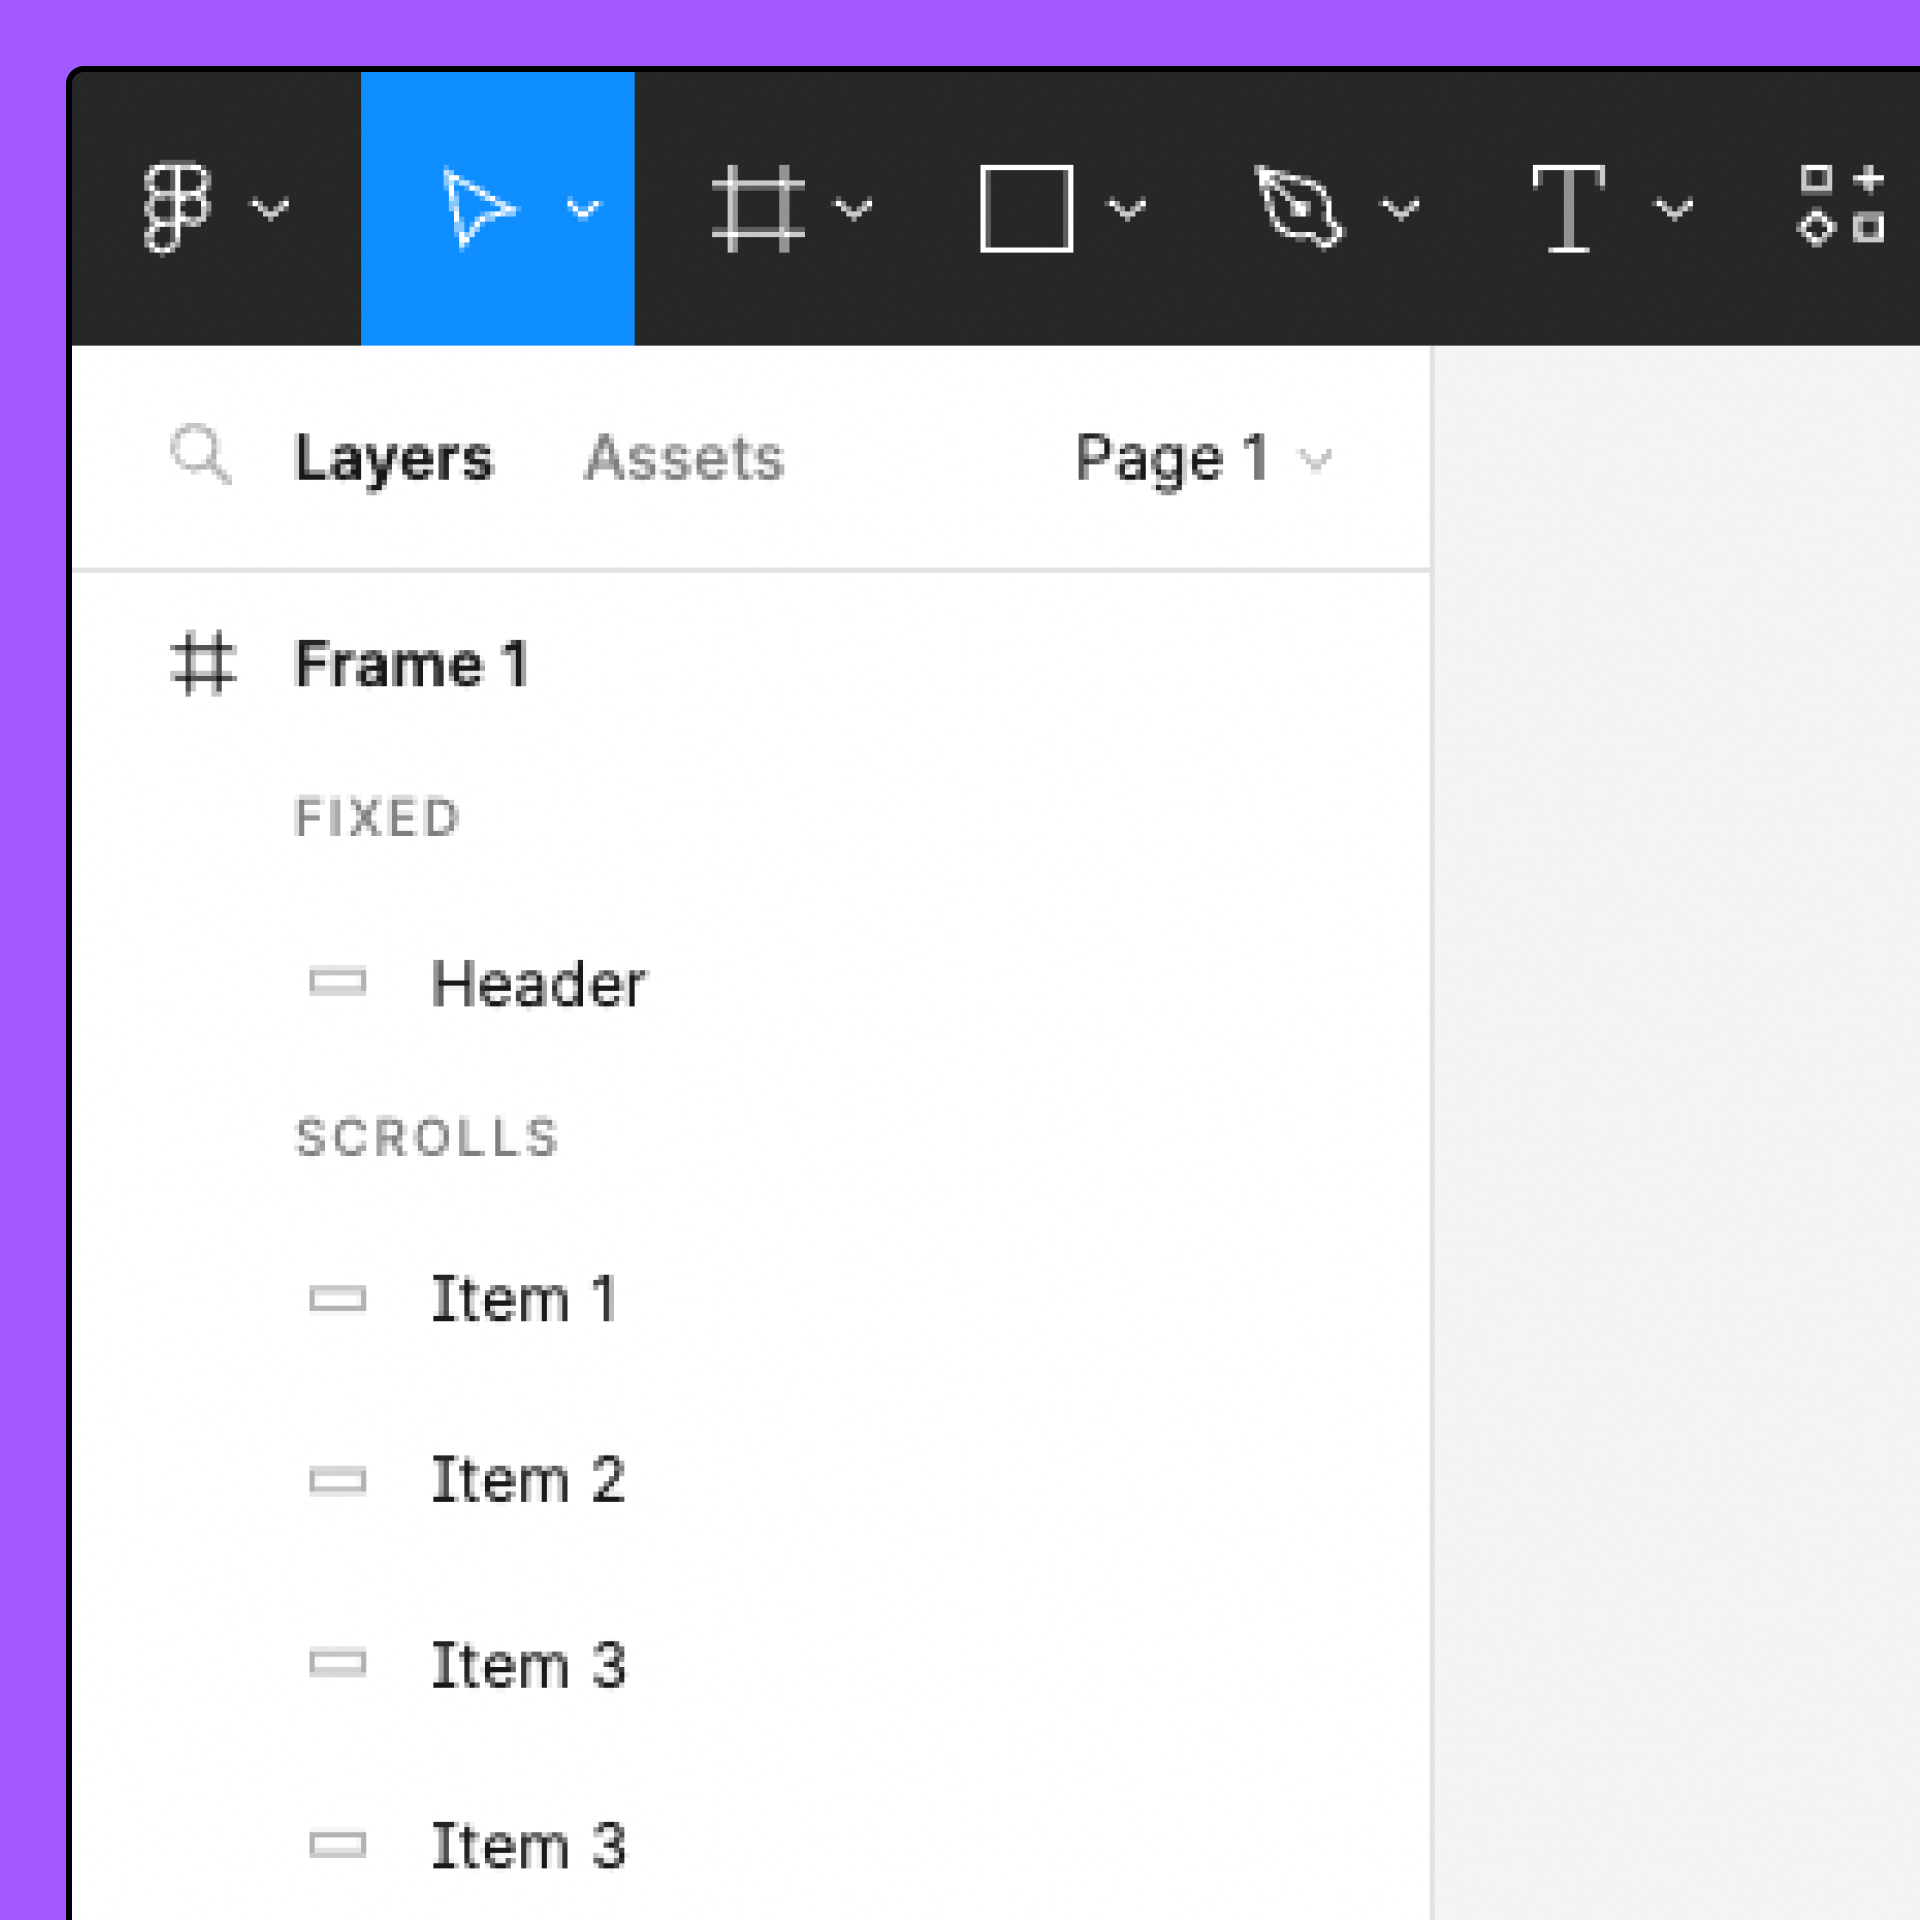 The layers panel shows layers labeled as Fixed.